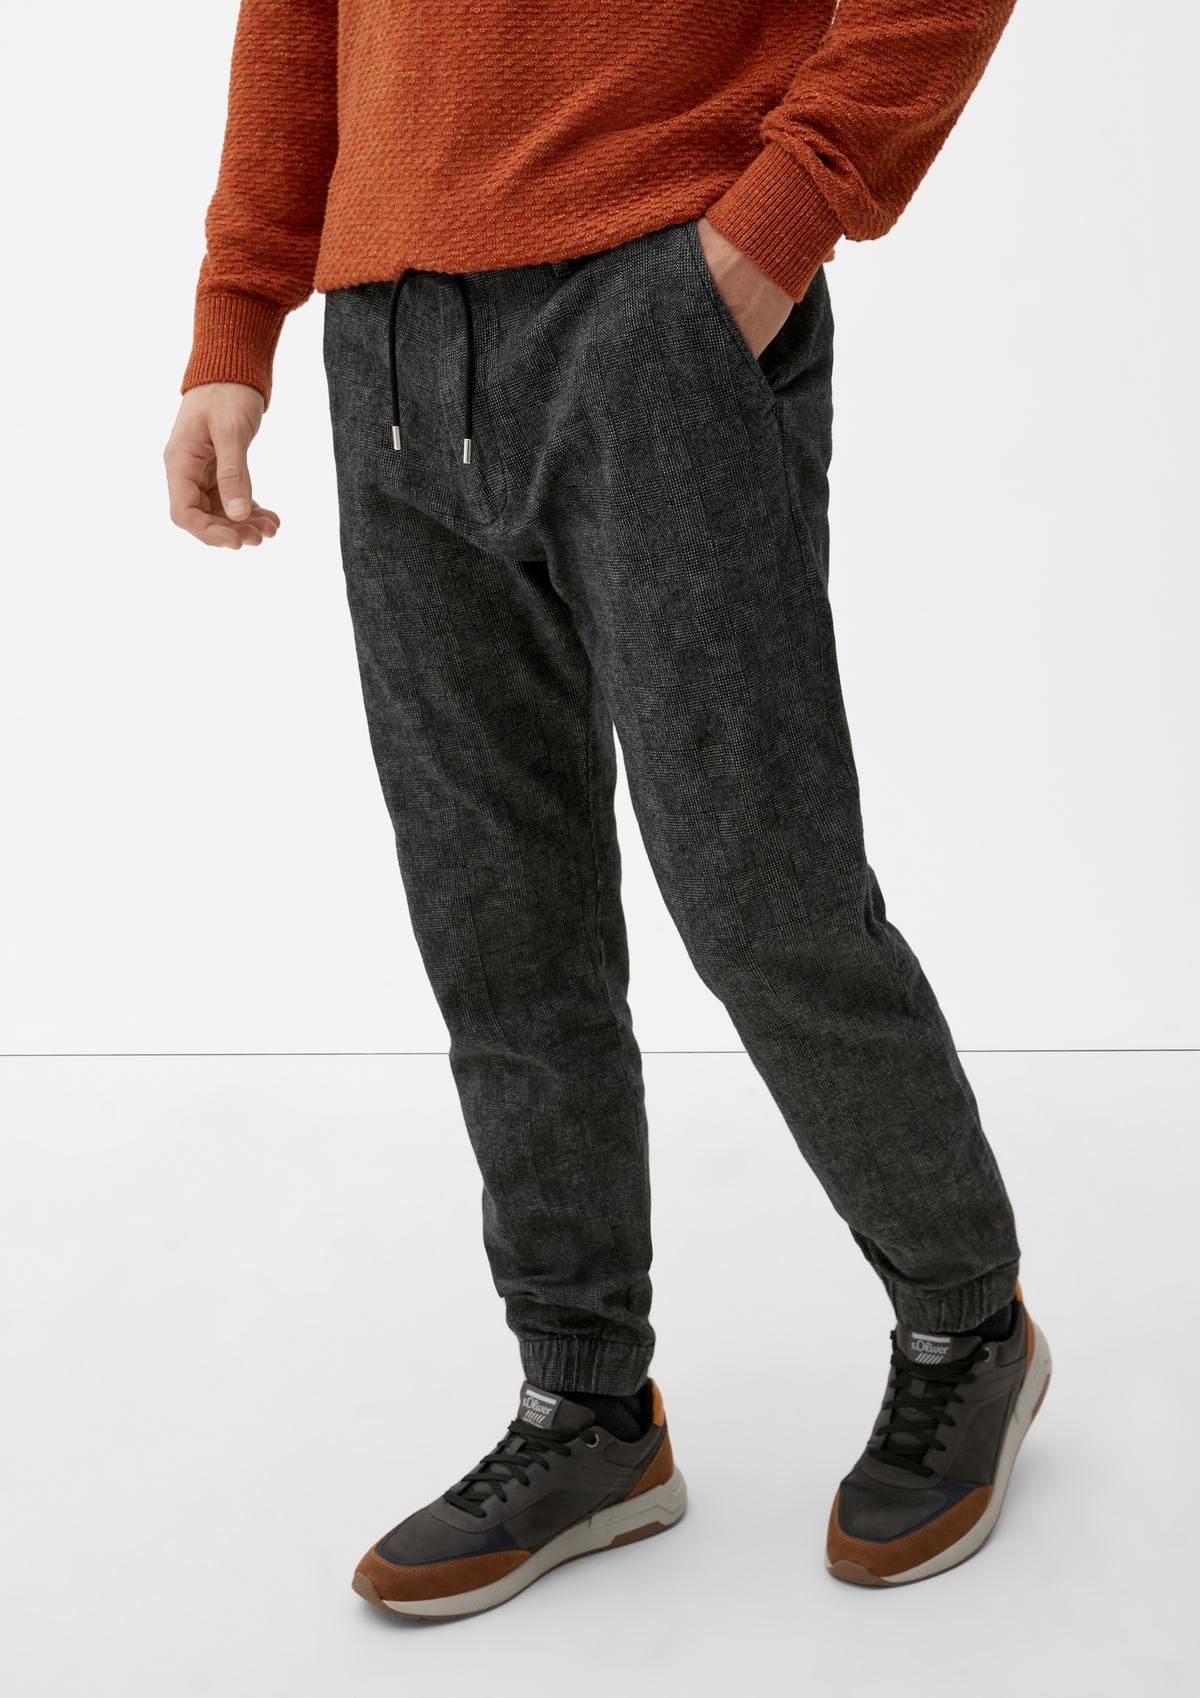 s. Oliver | bottoms dark an tracksuit all-over pattern - with grey fit: Relaxed